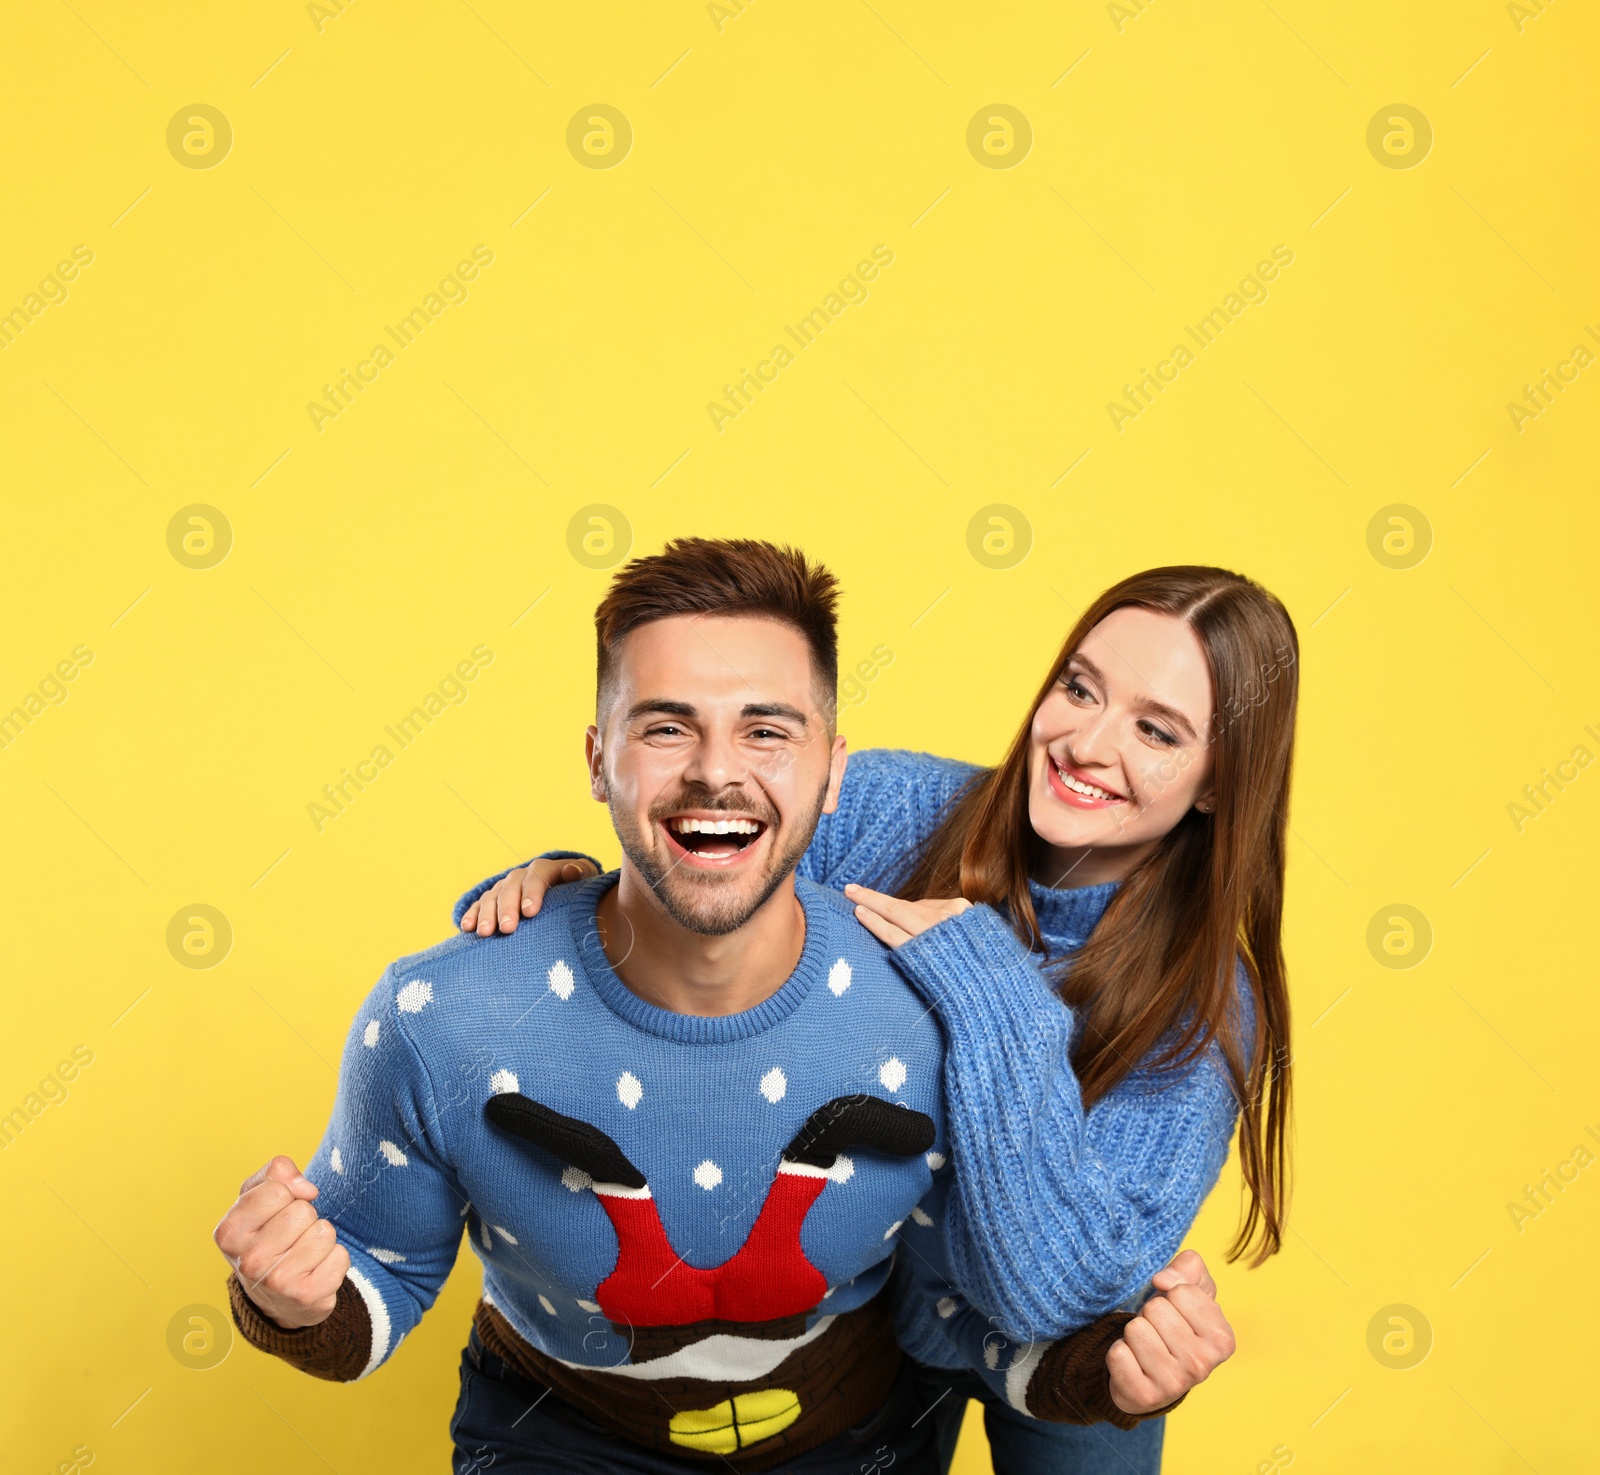 Photo of Couple wearing Christmas sweaters on yellow background